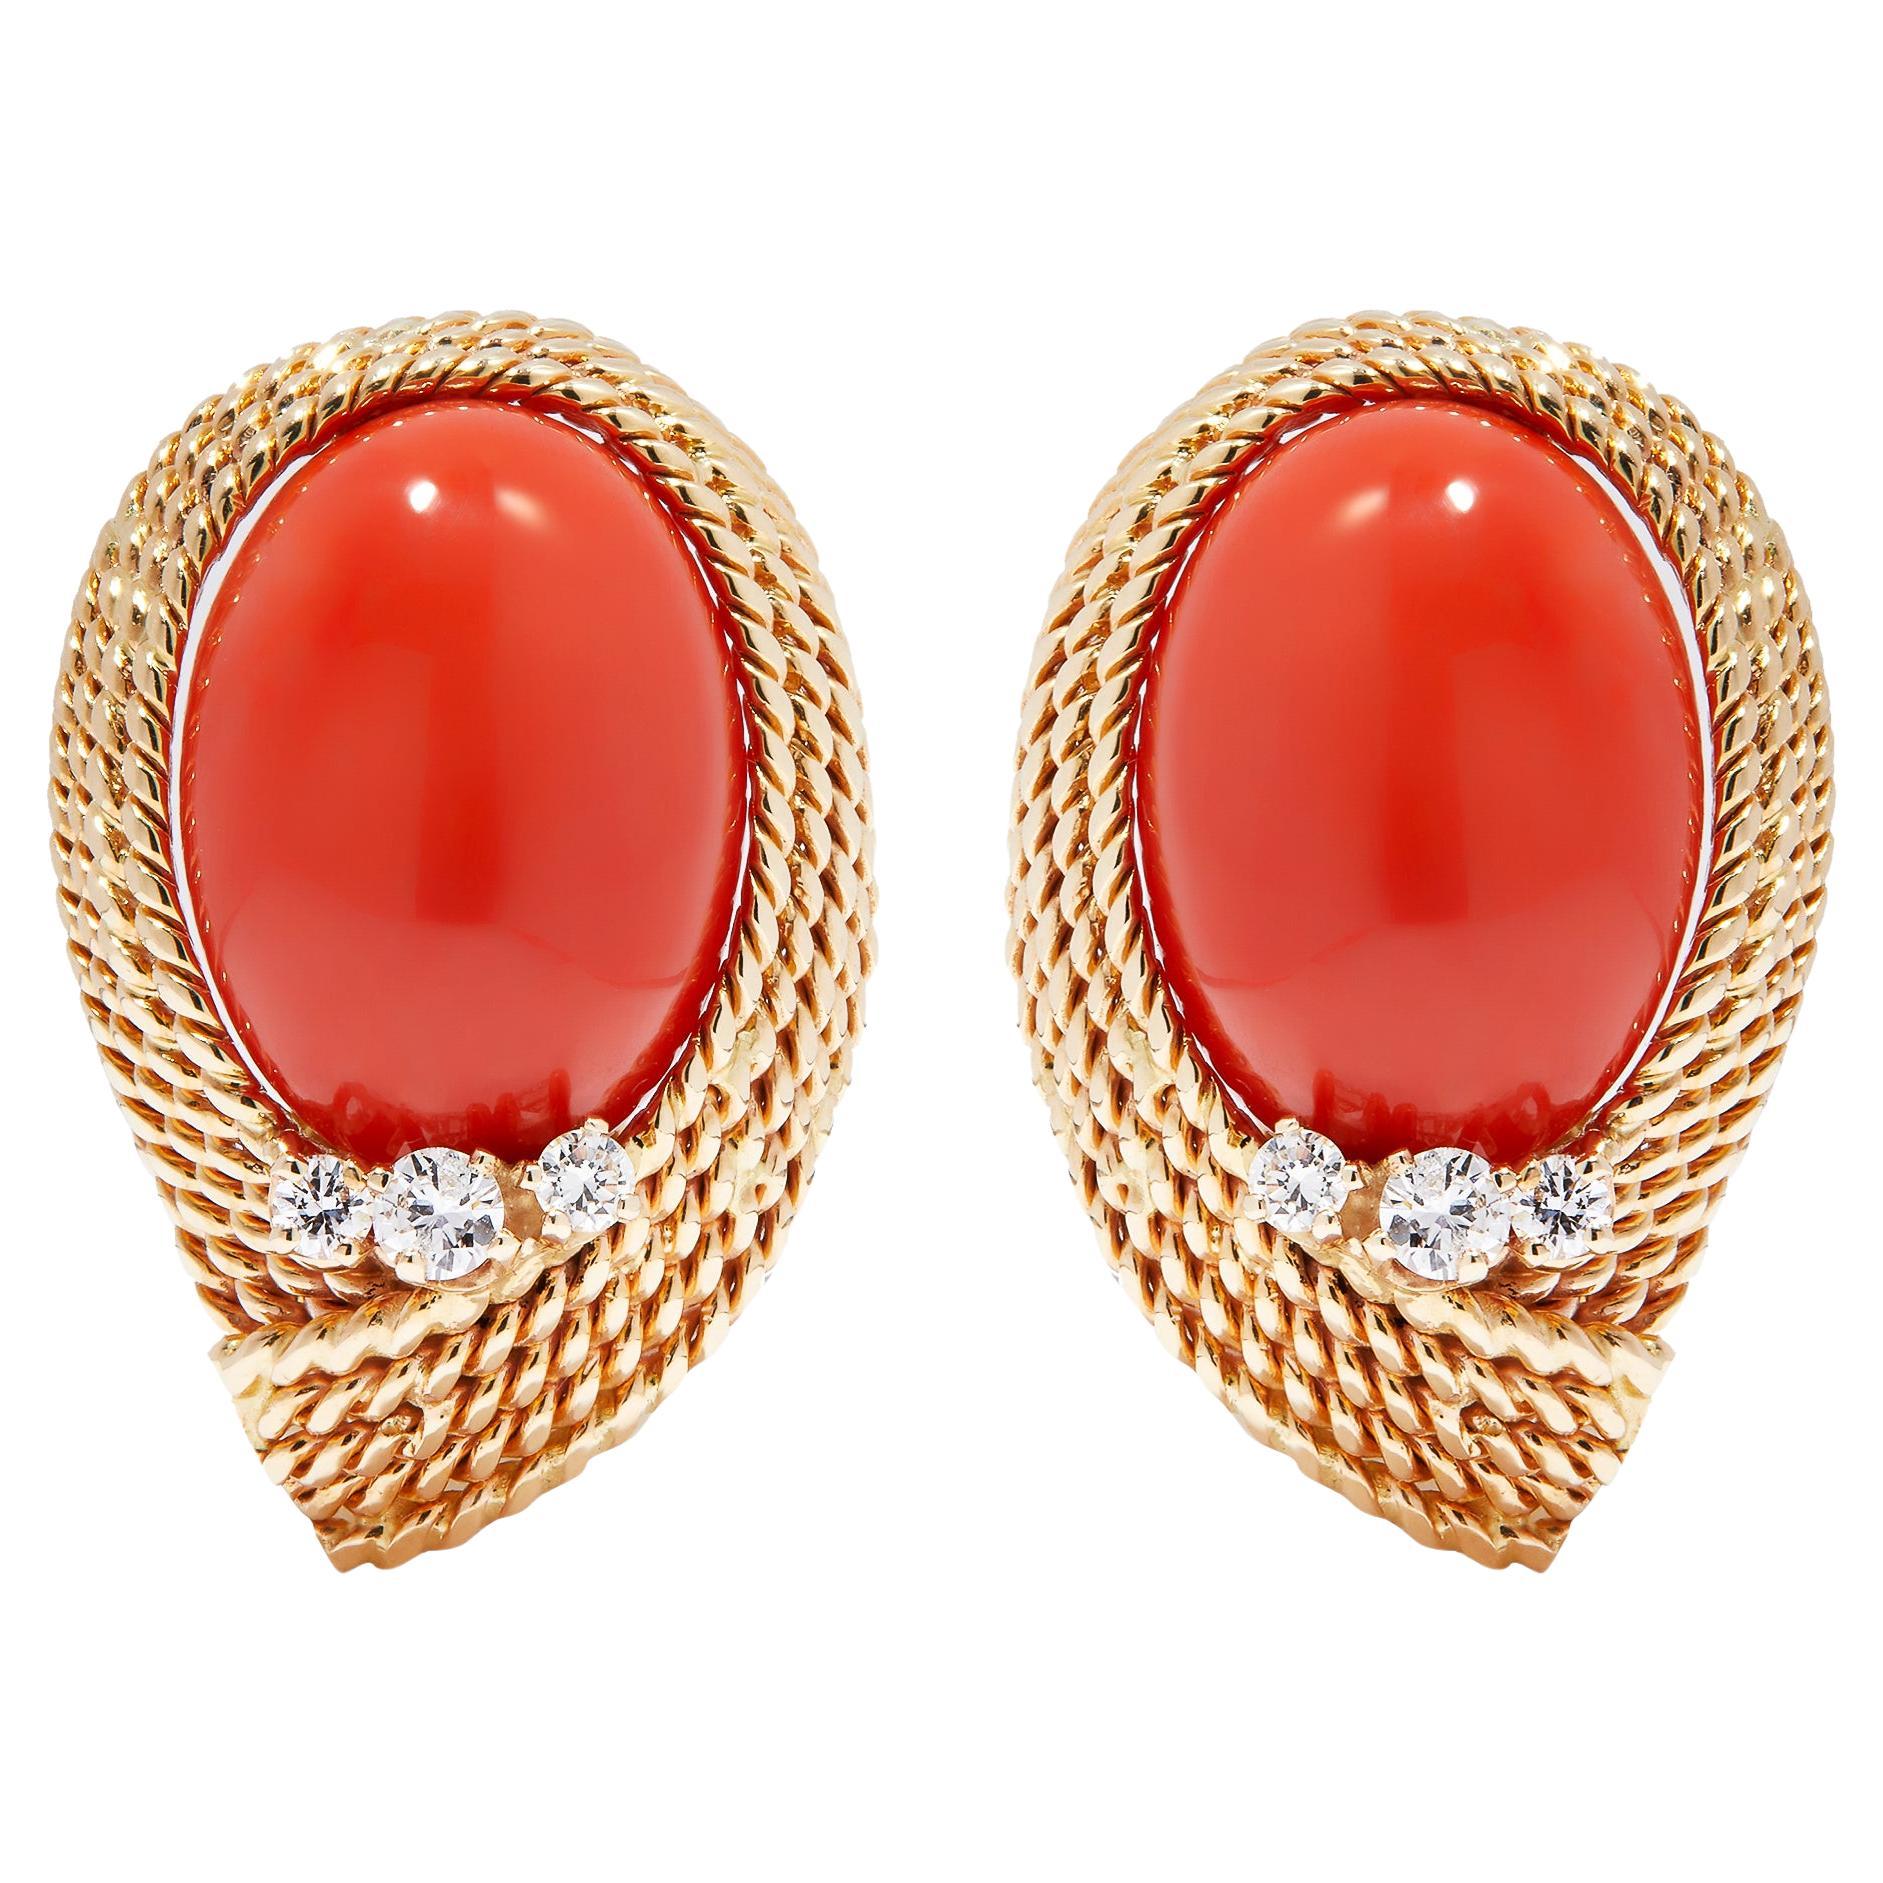 Designer Earrings with Gold Rope Twist and Coral Cabochons